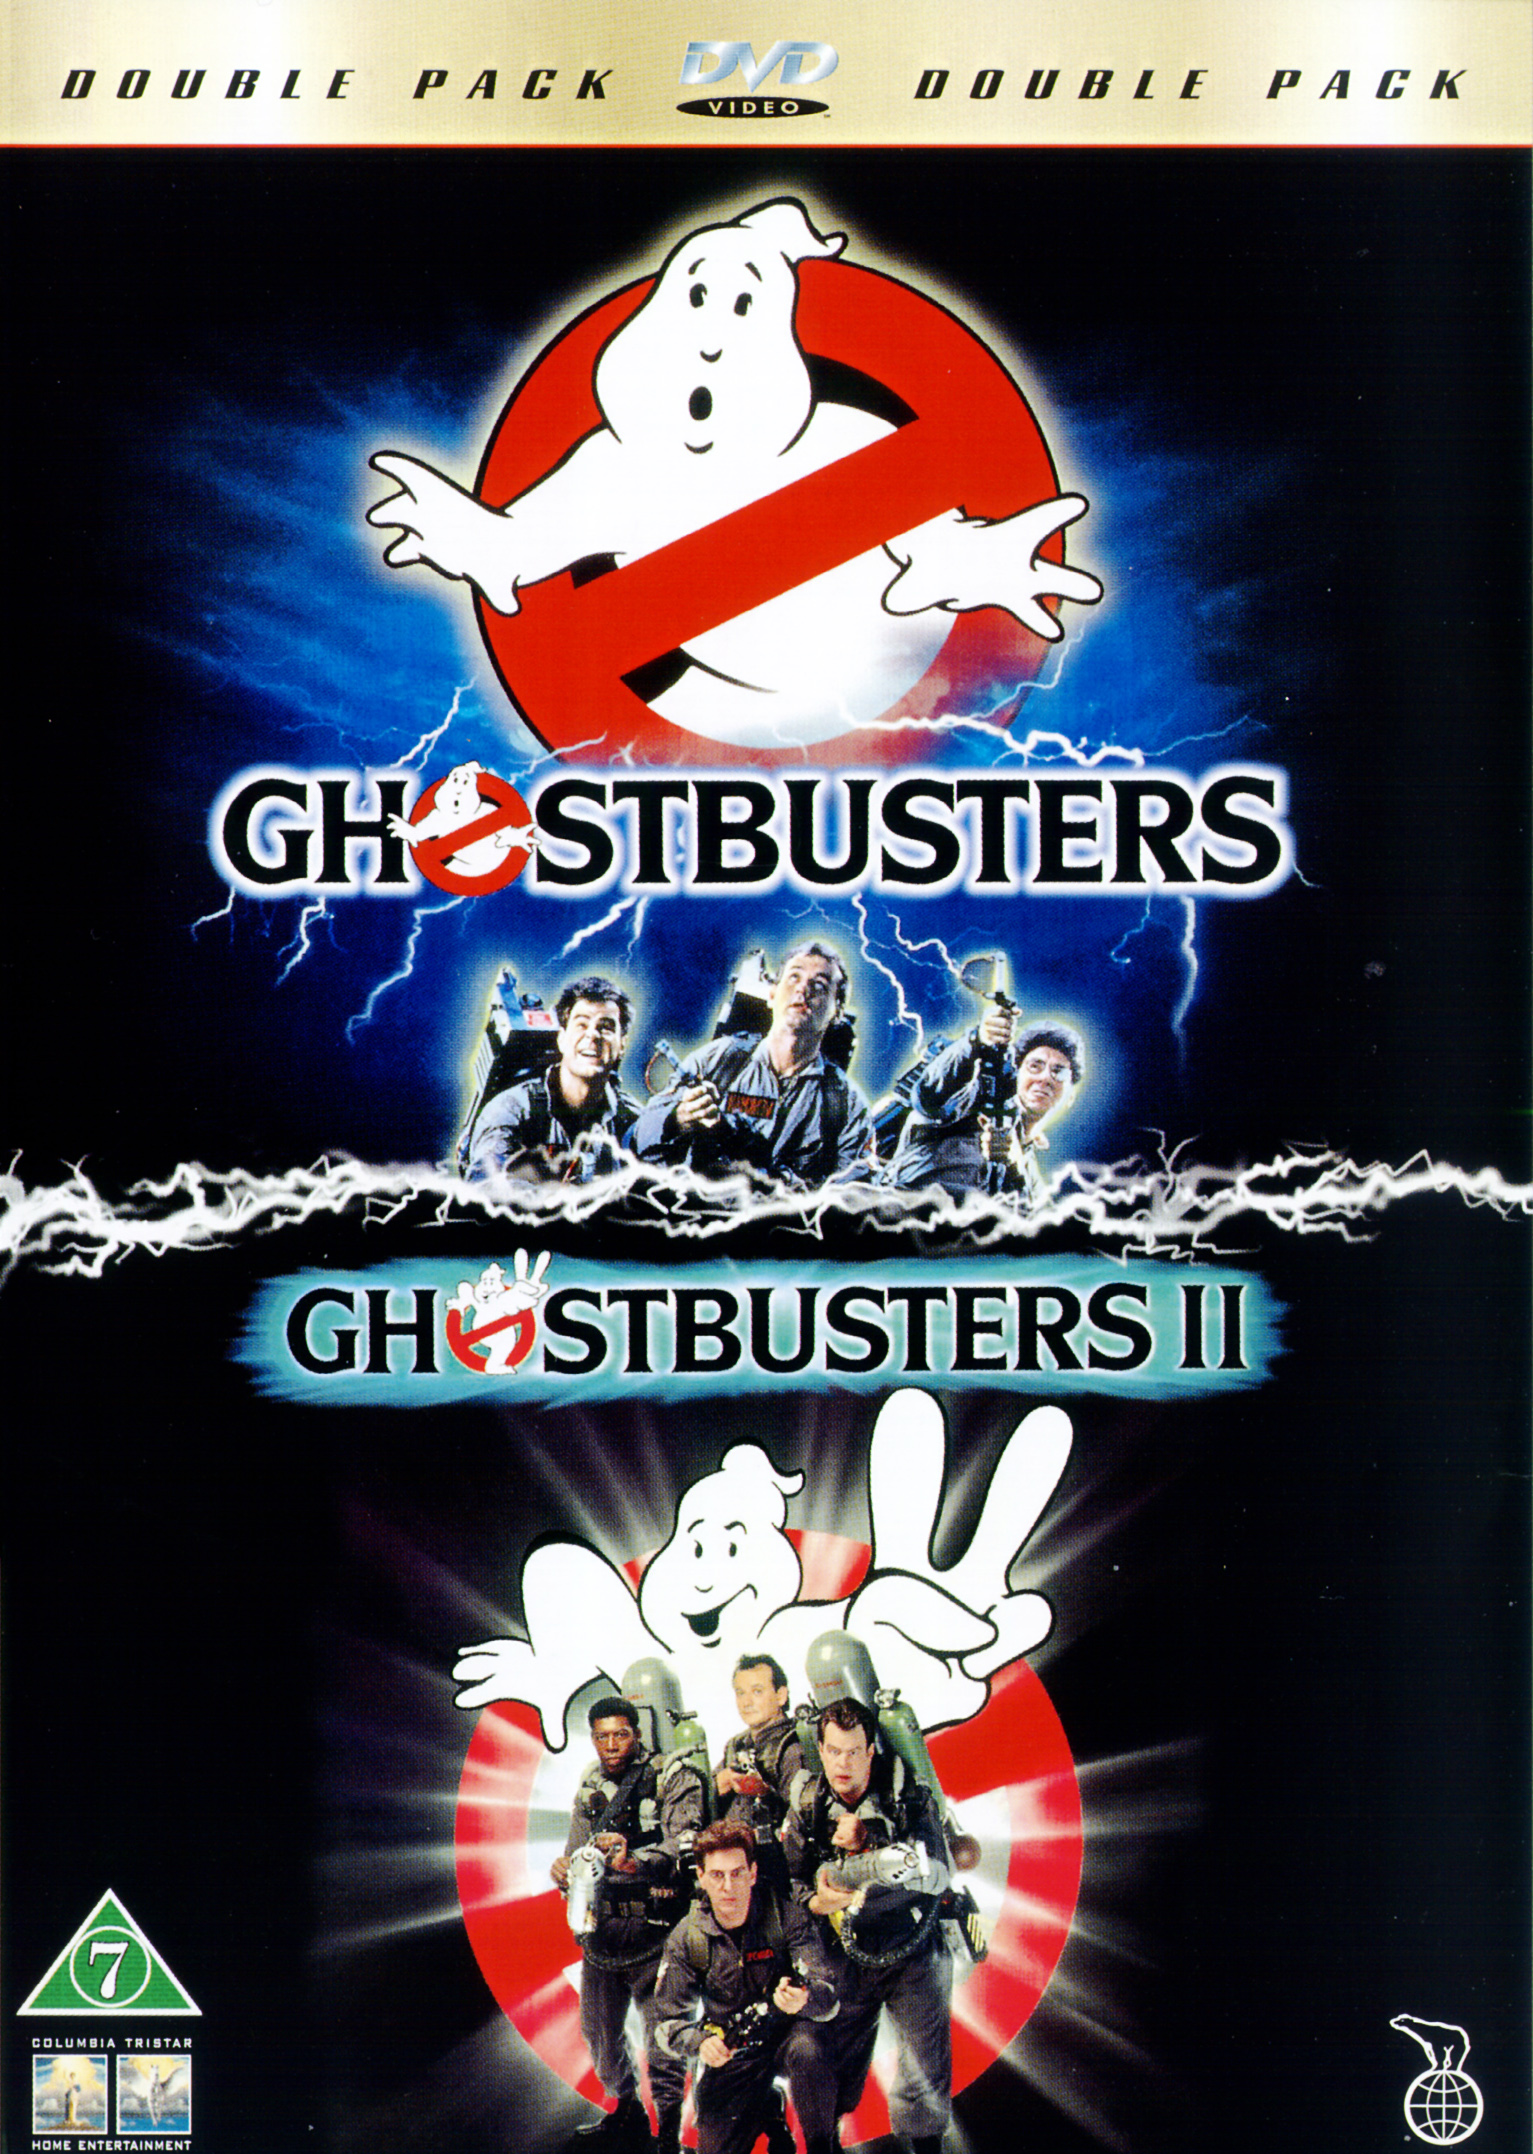   :  - Ghost Busters- Dilogy